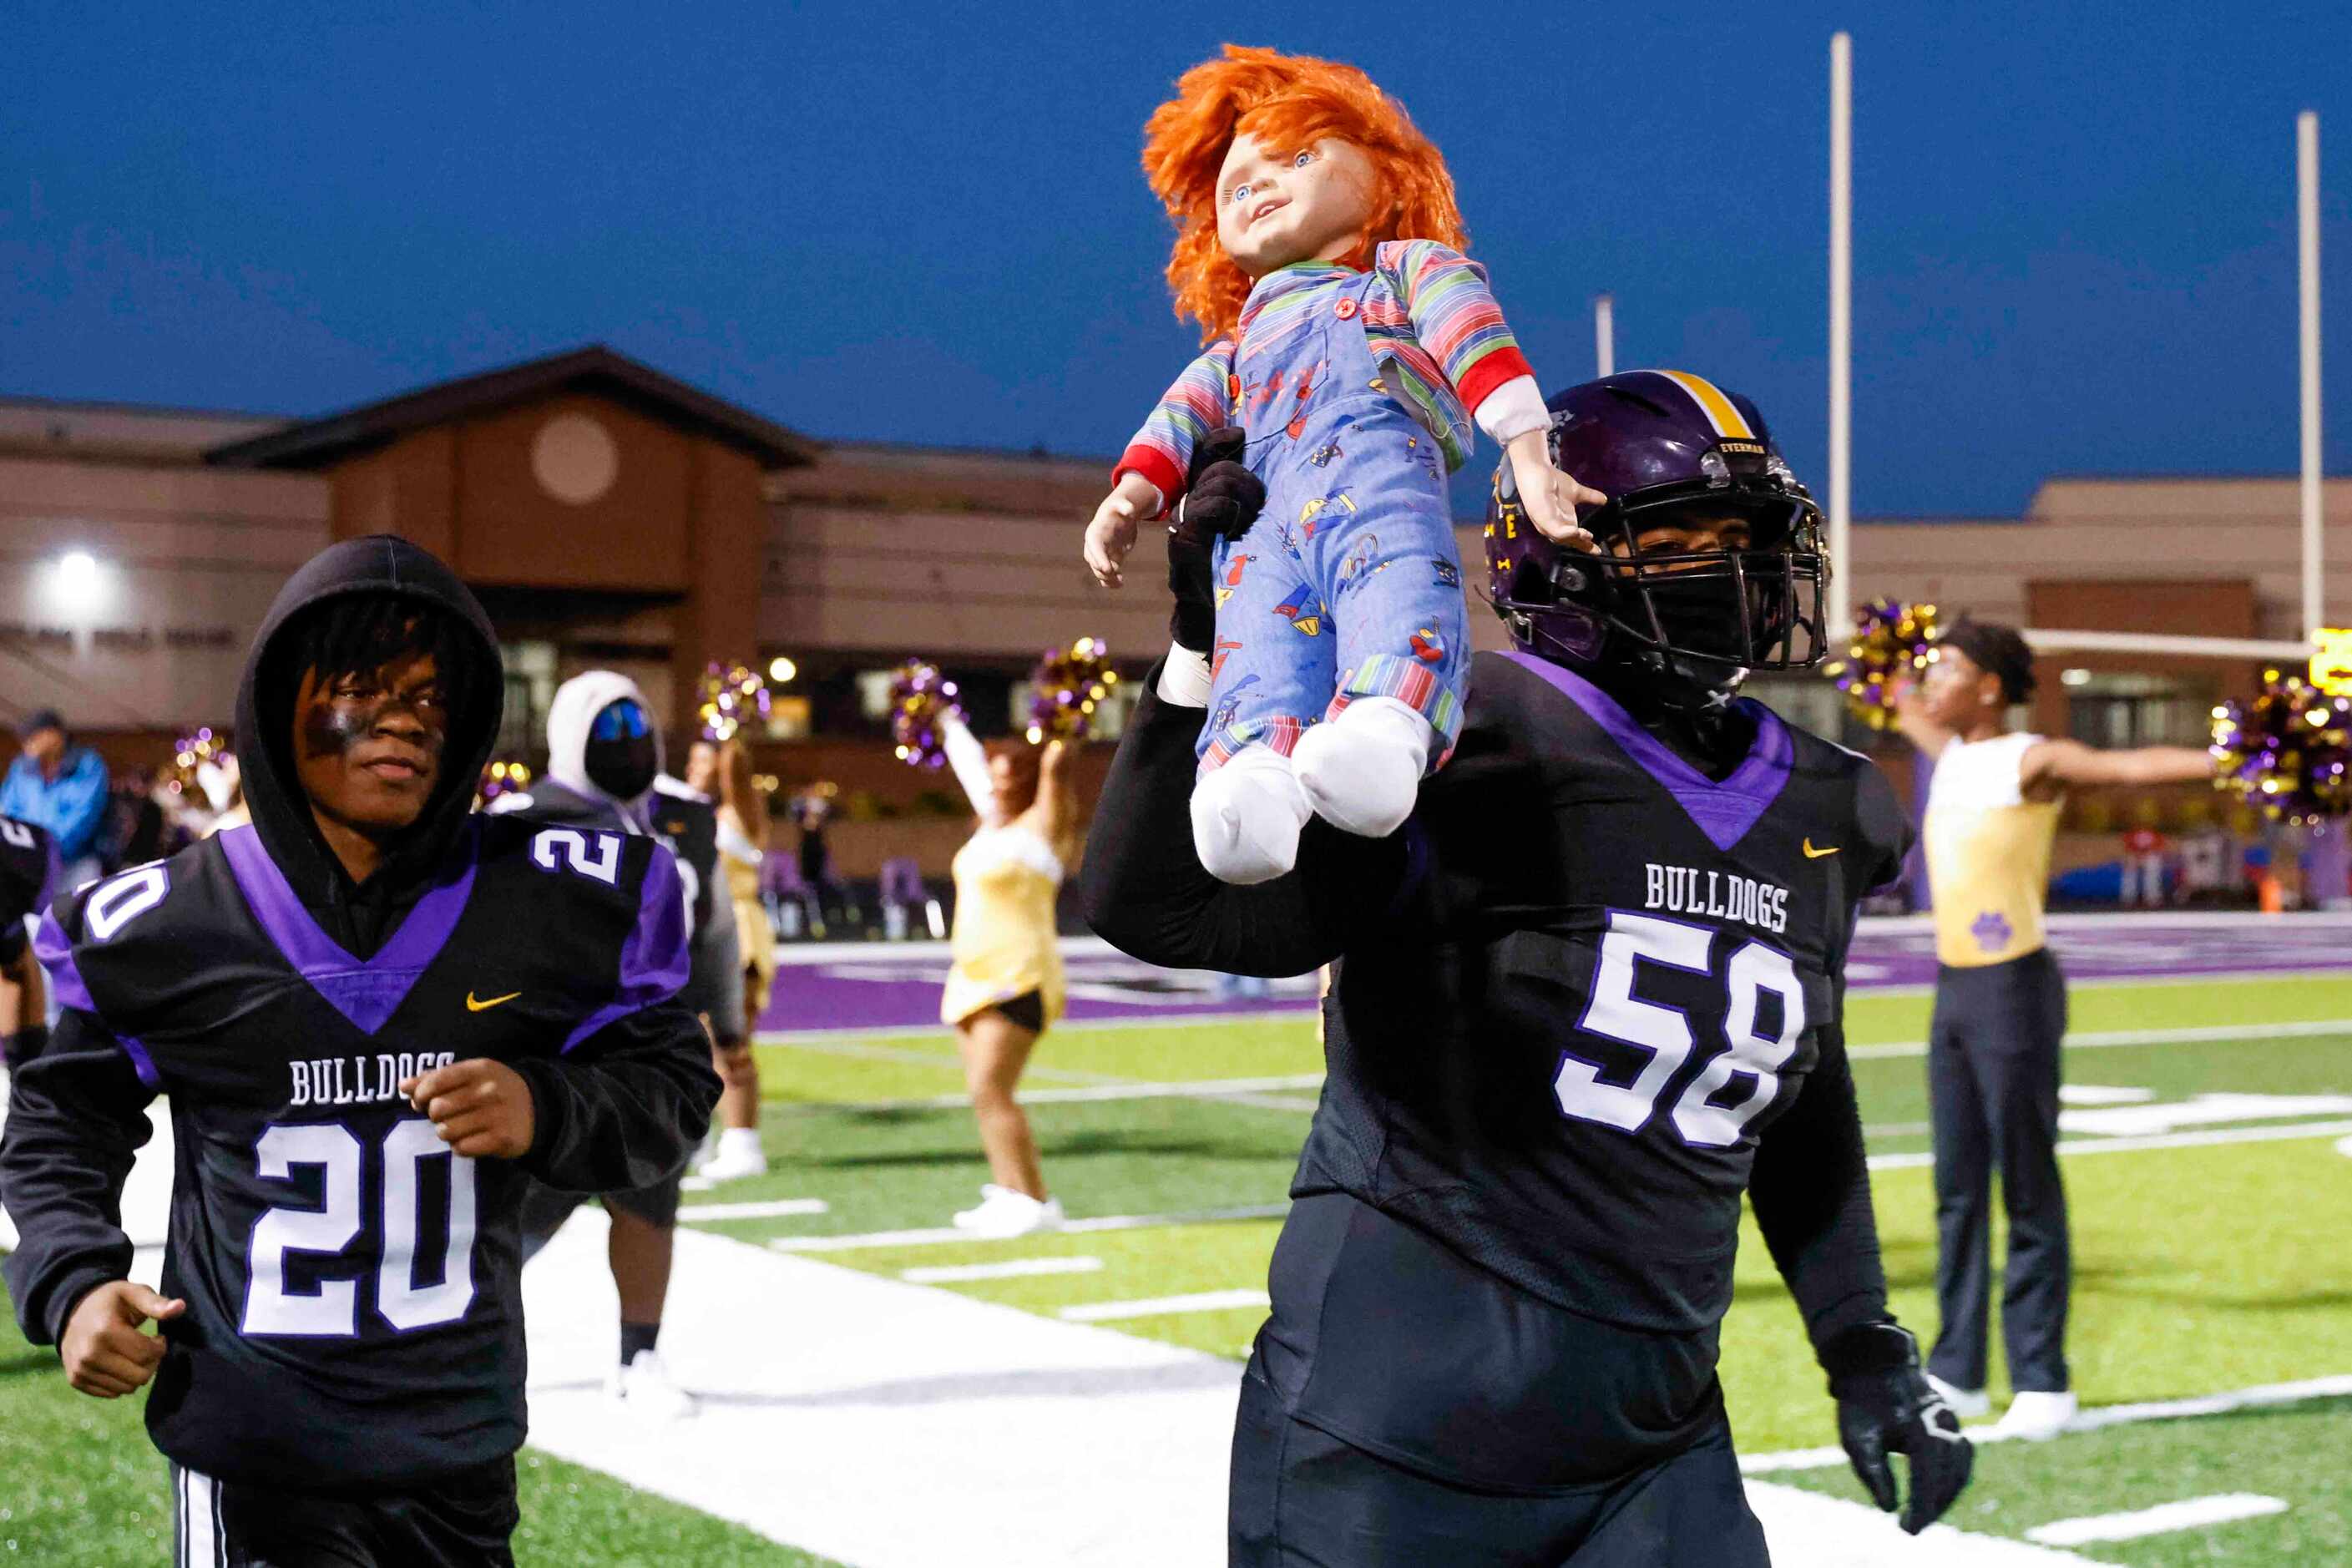 Everman High’s Jason Palmer (58) carries a Chuckie doll as he and his teammates enter the...